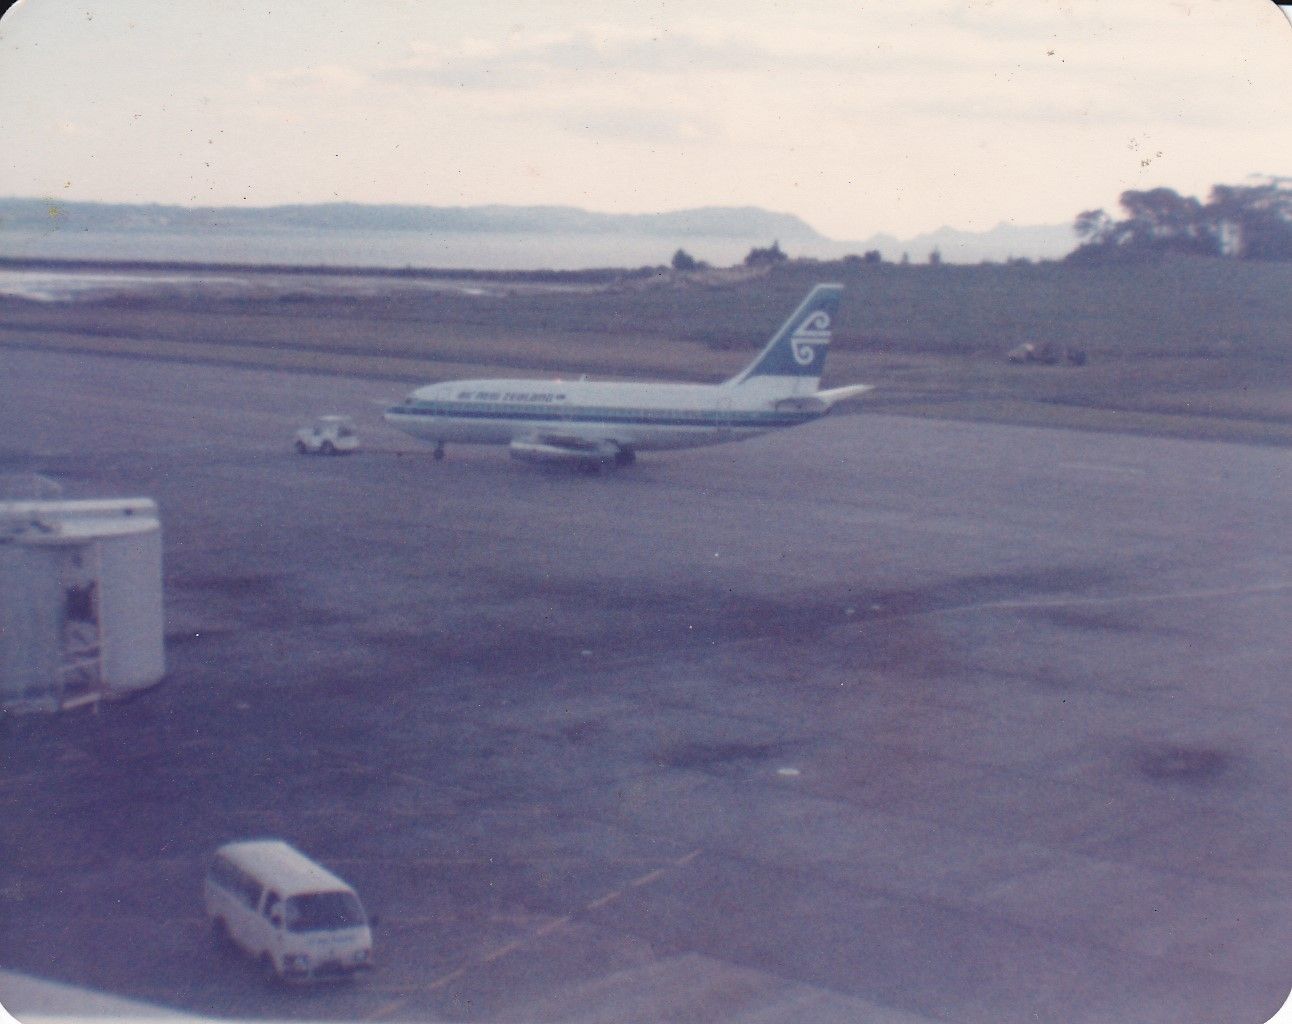 Boeing 737-200 (ZK-NAR) - My Rare photo collection of this little B732 on departure back in 1982 to Tonga from Auckland airport nice mild sunset before the terminal got busy with the heavies returning from over the tasman